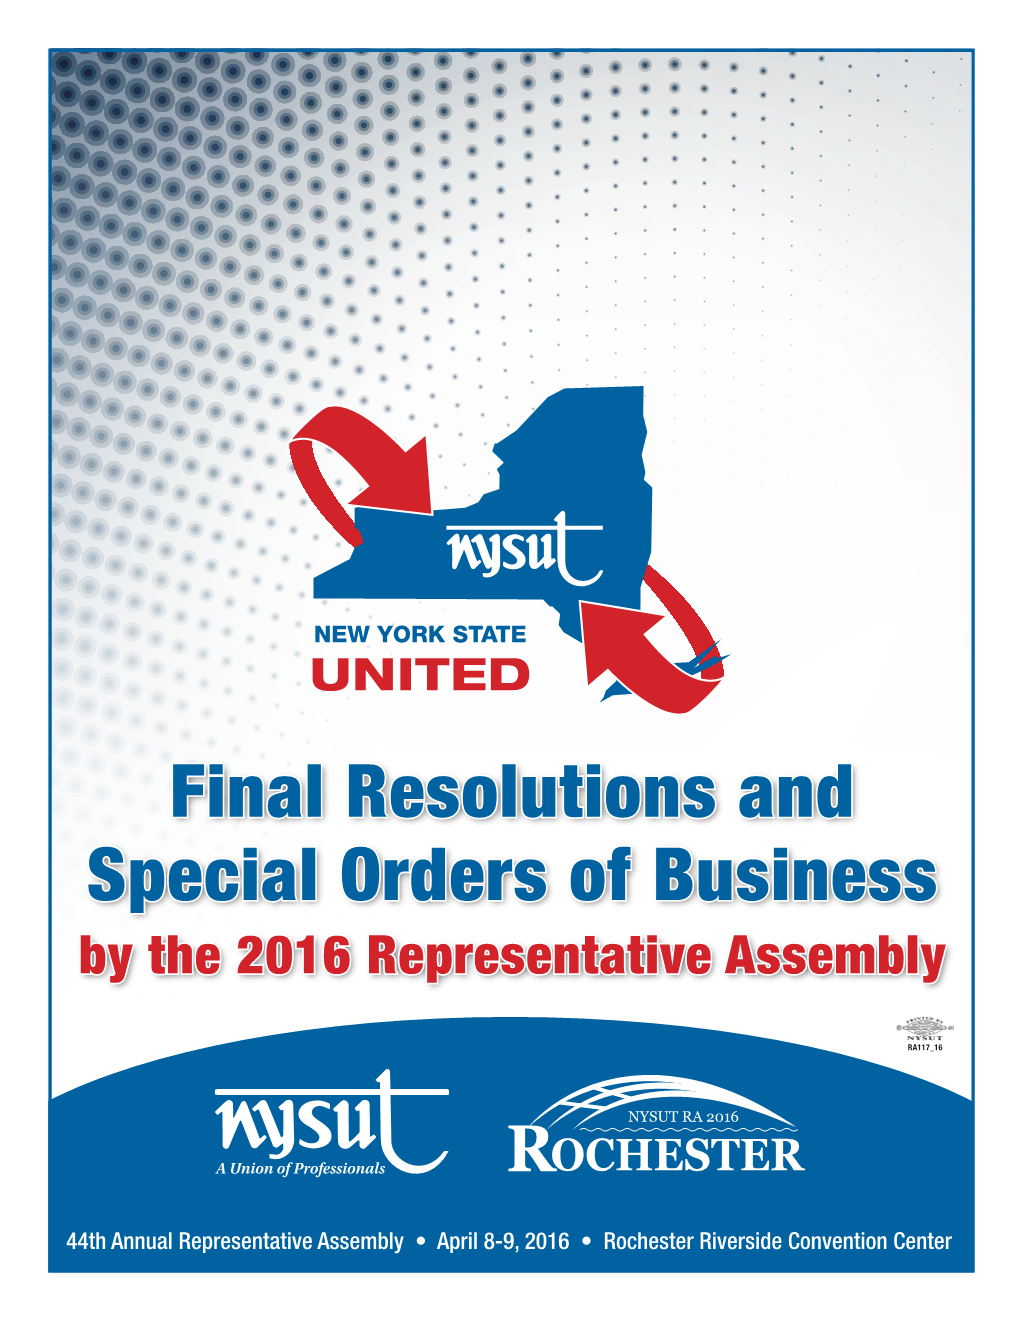 Final Resolutions and Special Orders of Business by the 2016 Representative Assembly